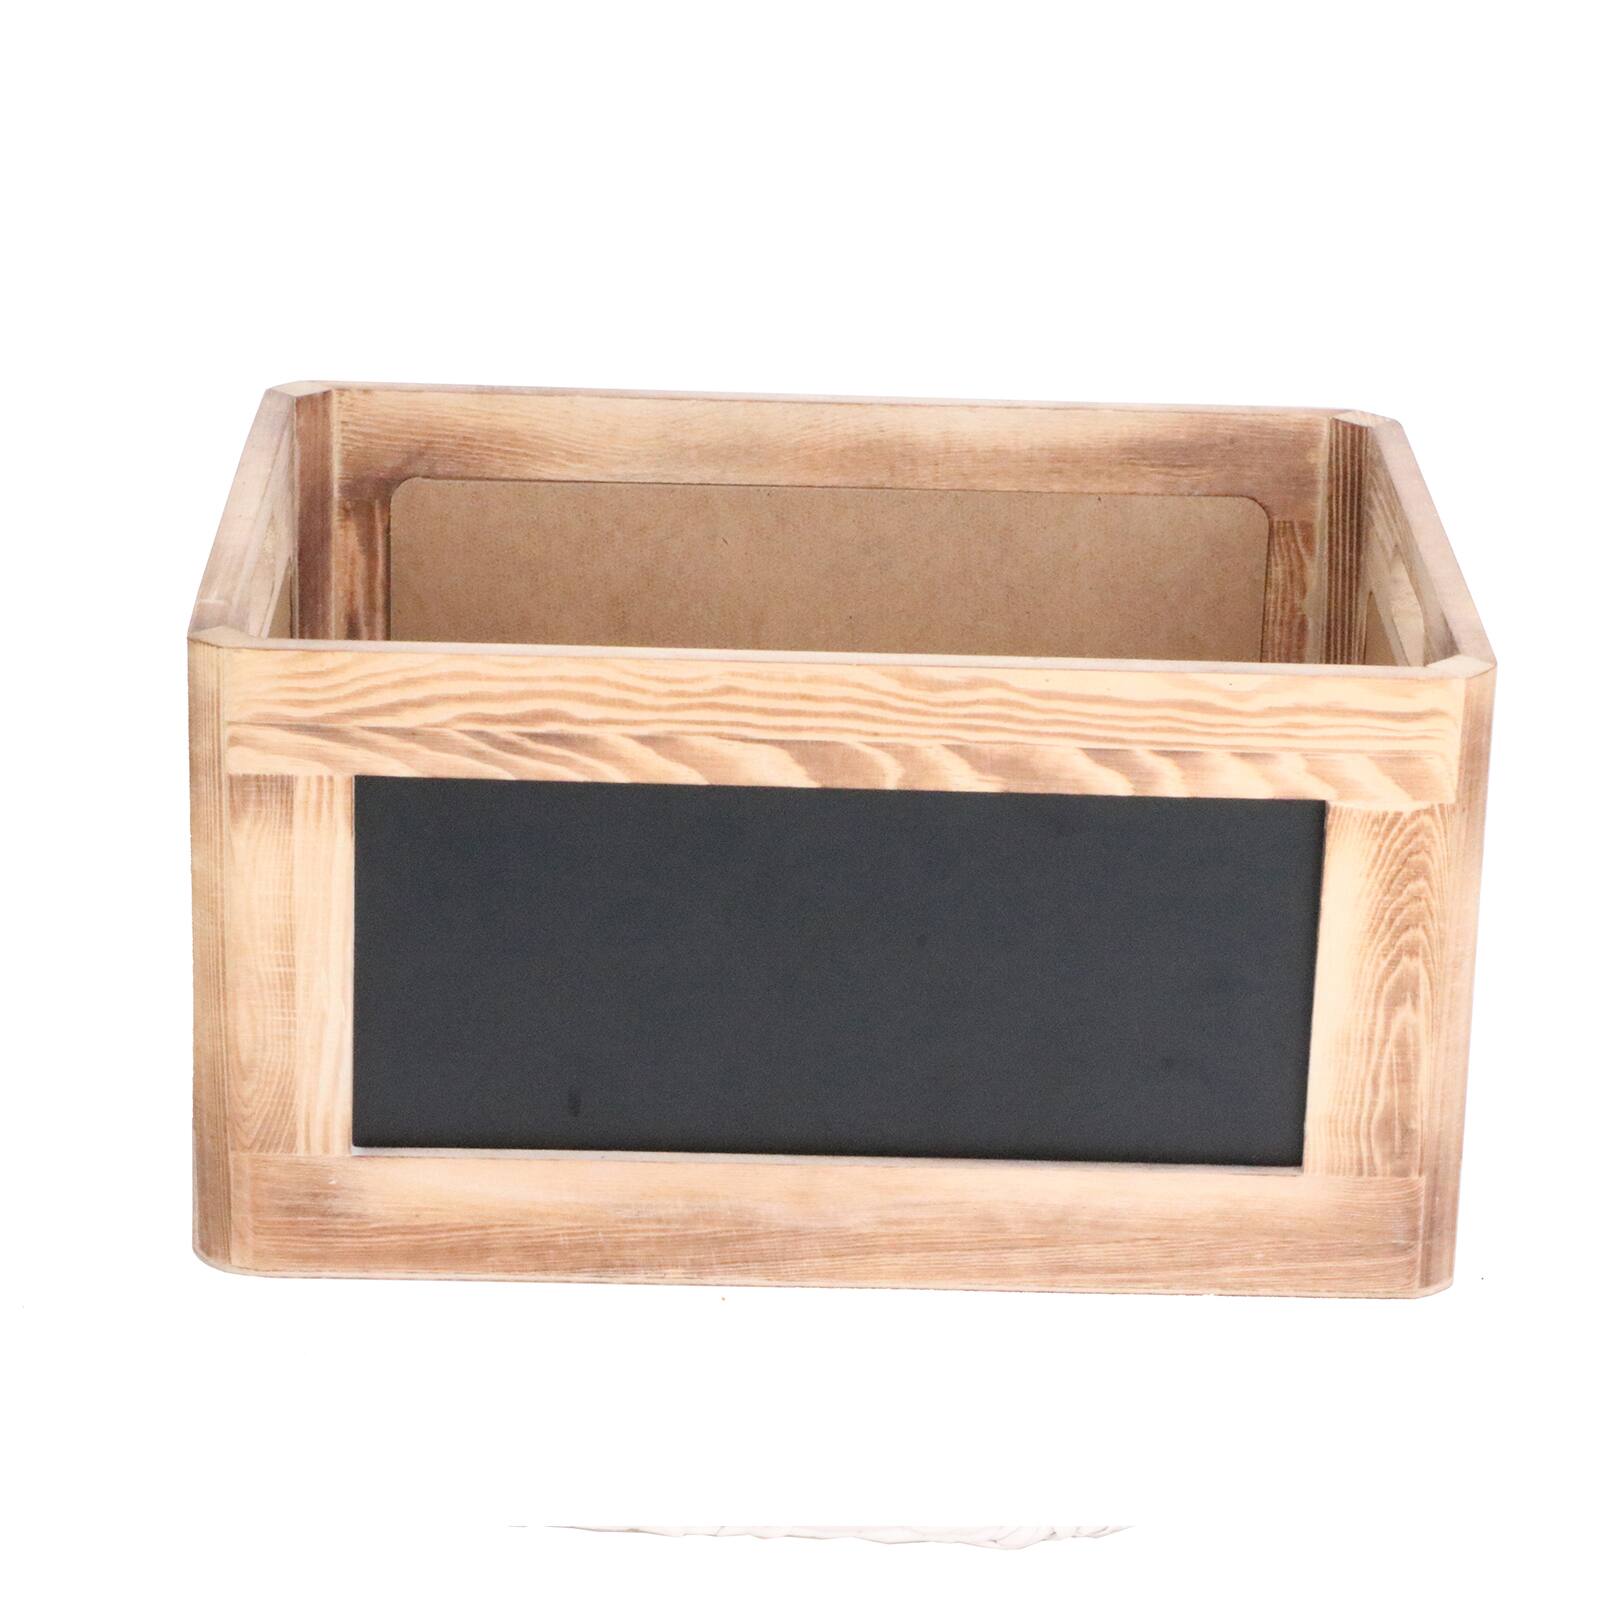 Shop for the Medium Brown Wood Crate 